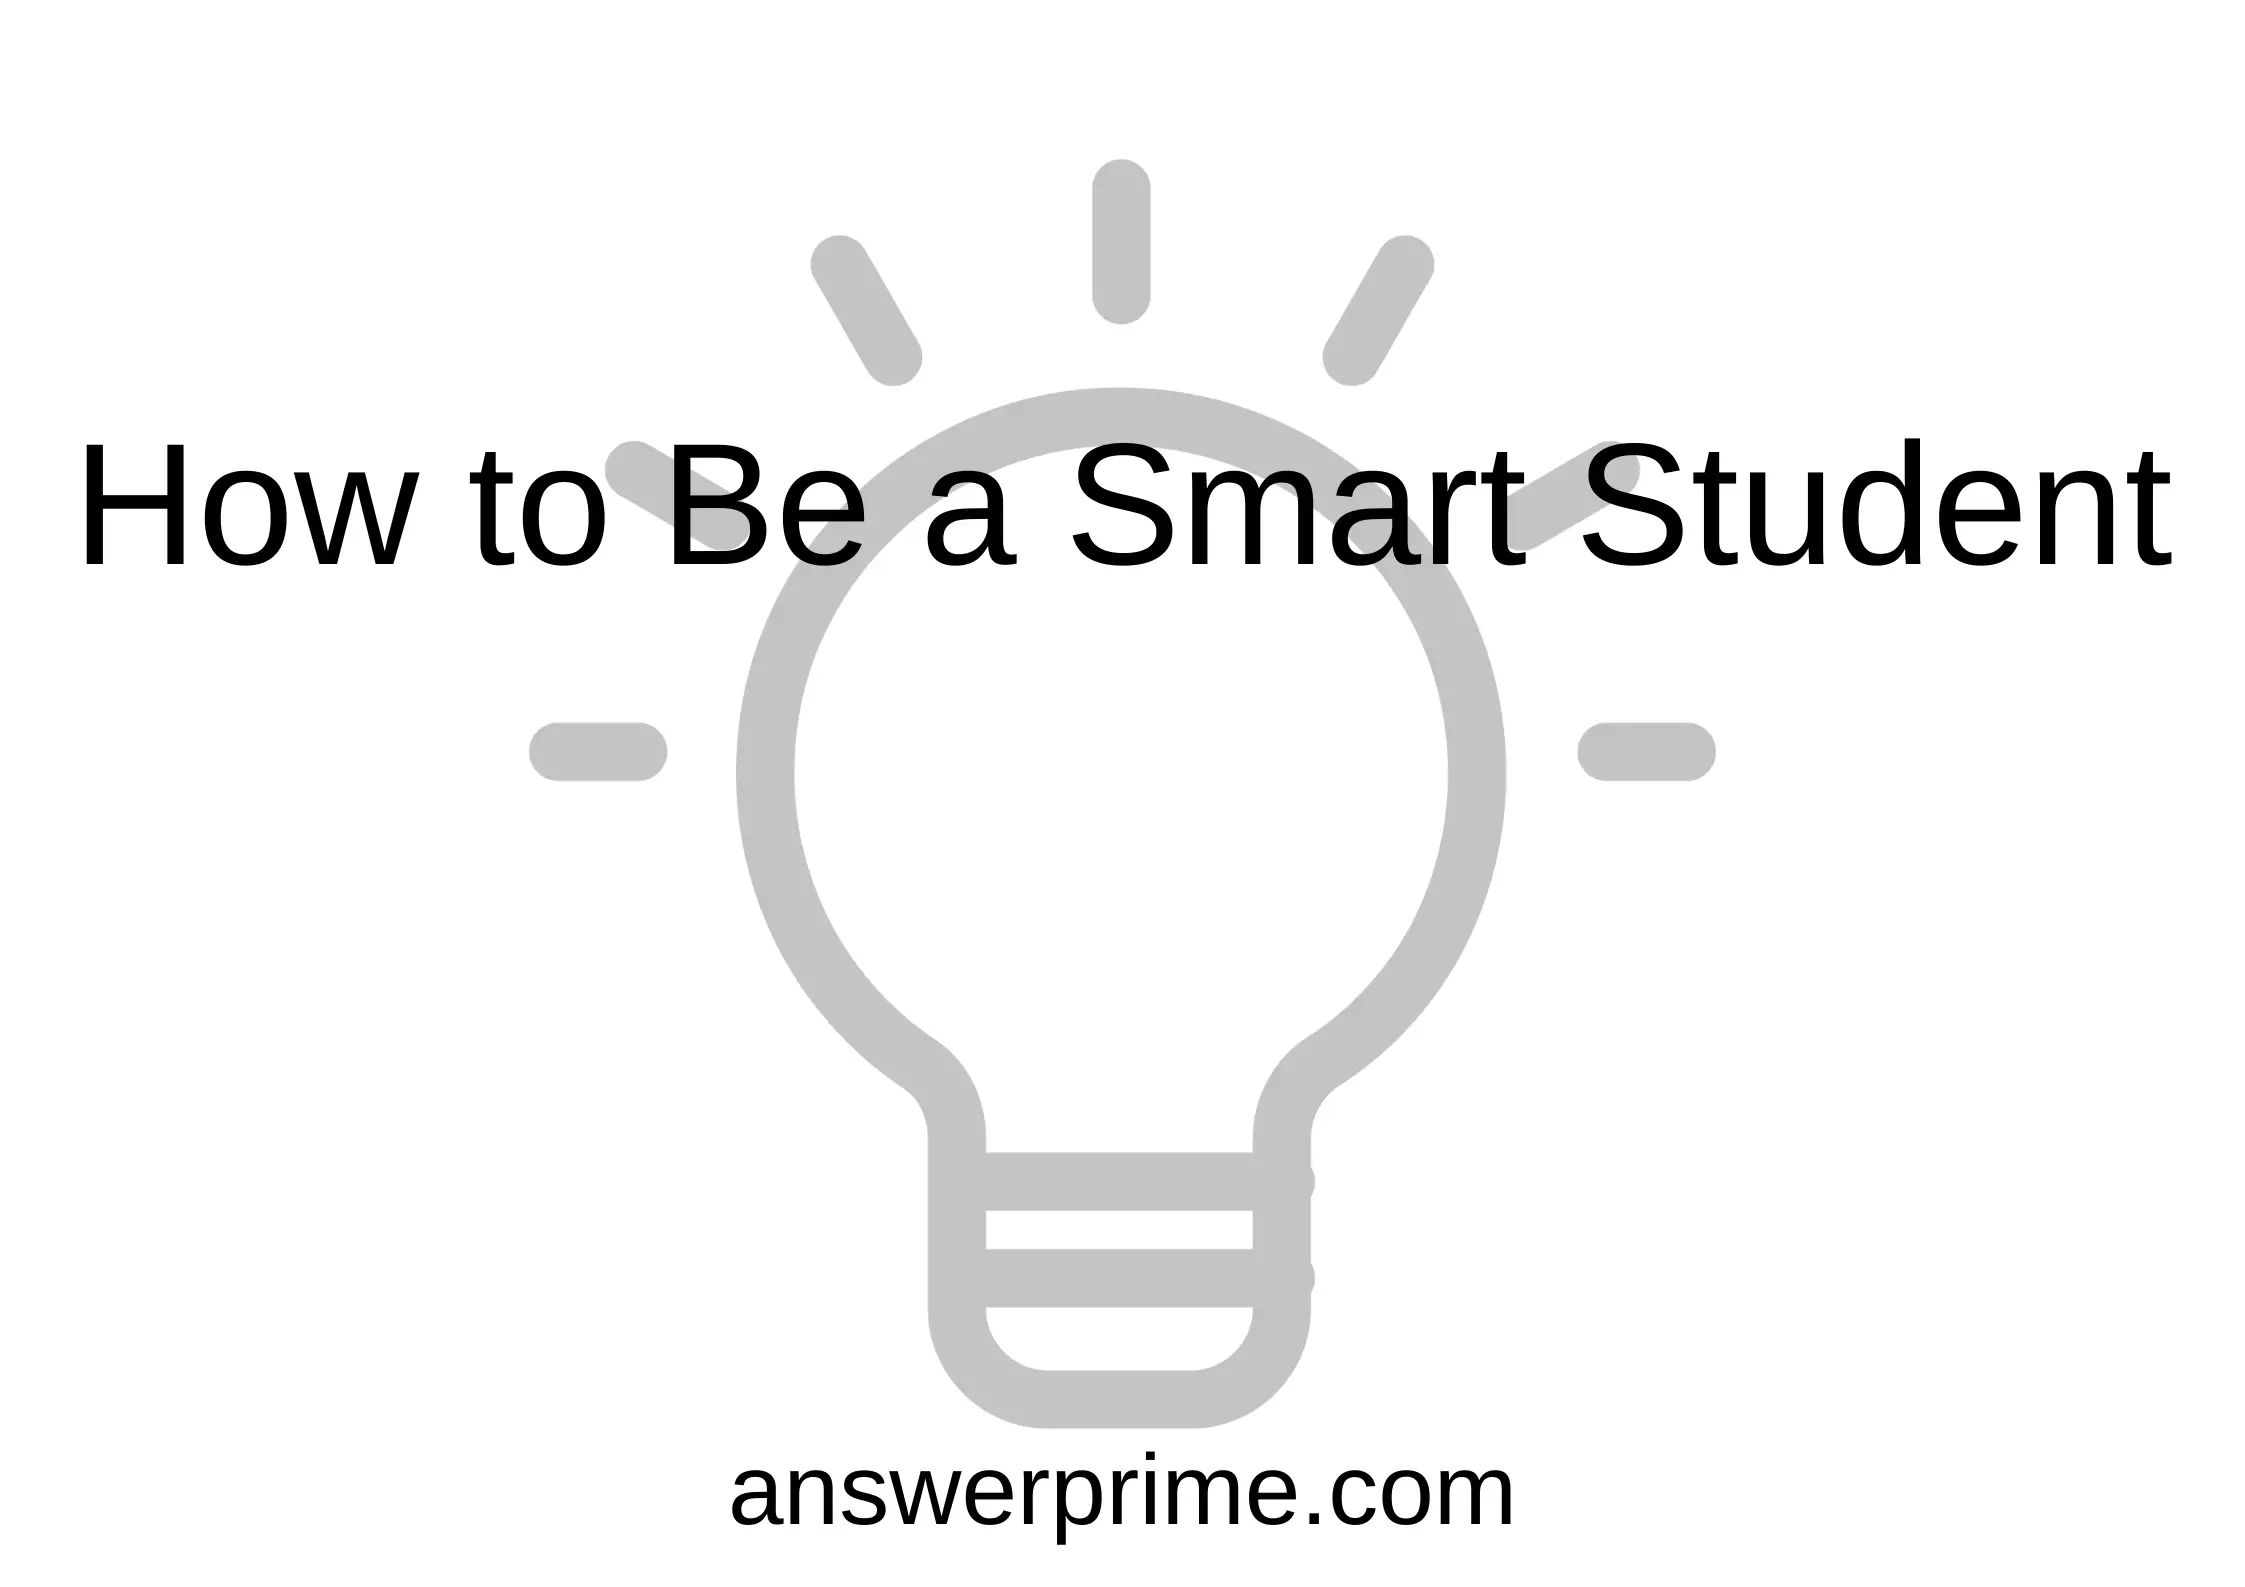 How to Be a Smart Student